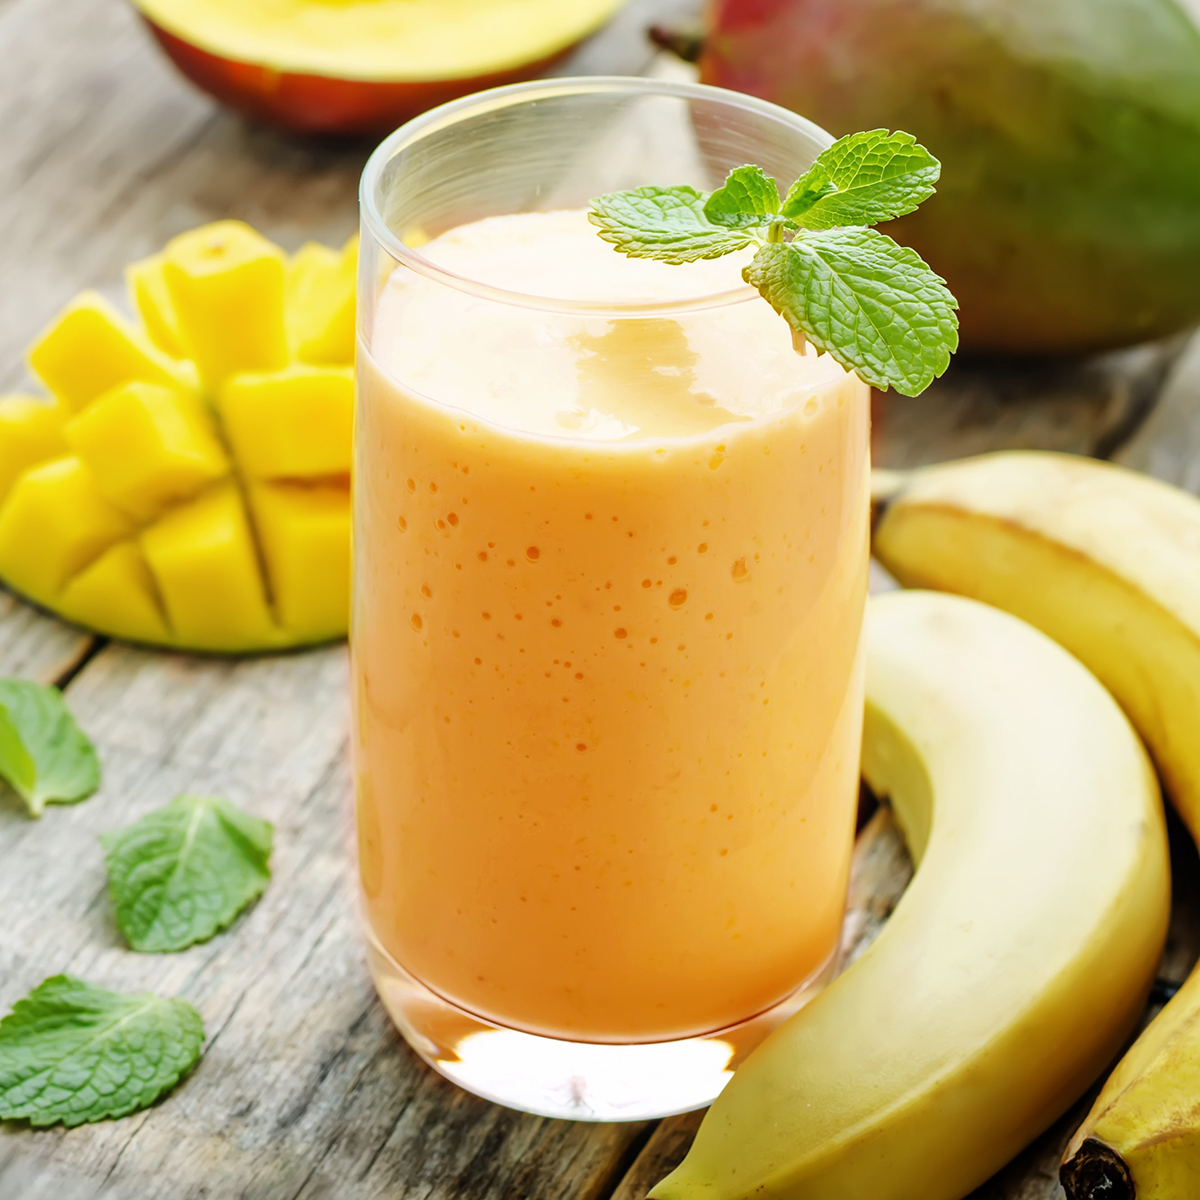 Boost Your Immunity With this Vitamin C Smoothie